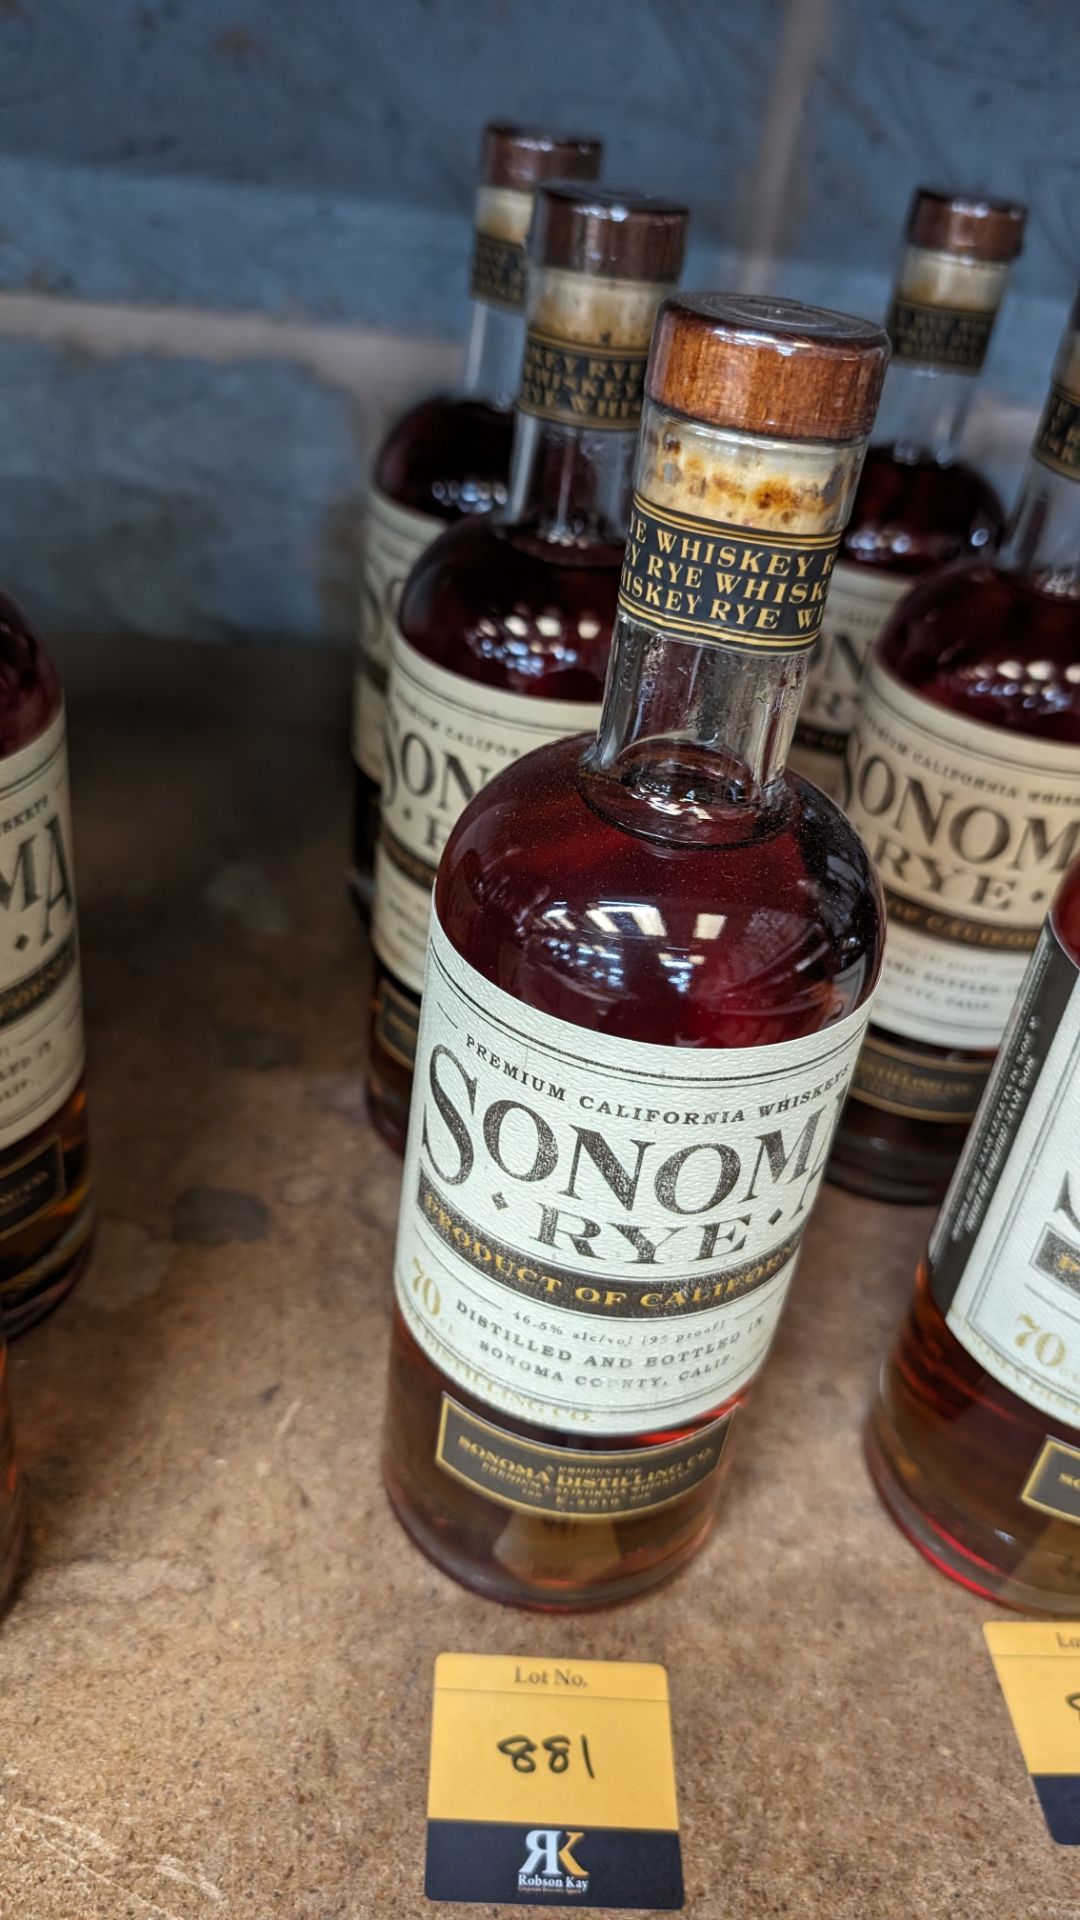 3 off 700ml bottles of Sonoma Rye Whiskey. 46.5% alc/vol (93 proof). Distilled and bottled in Sono - Image 6 of 6